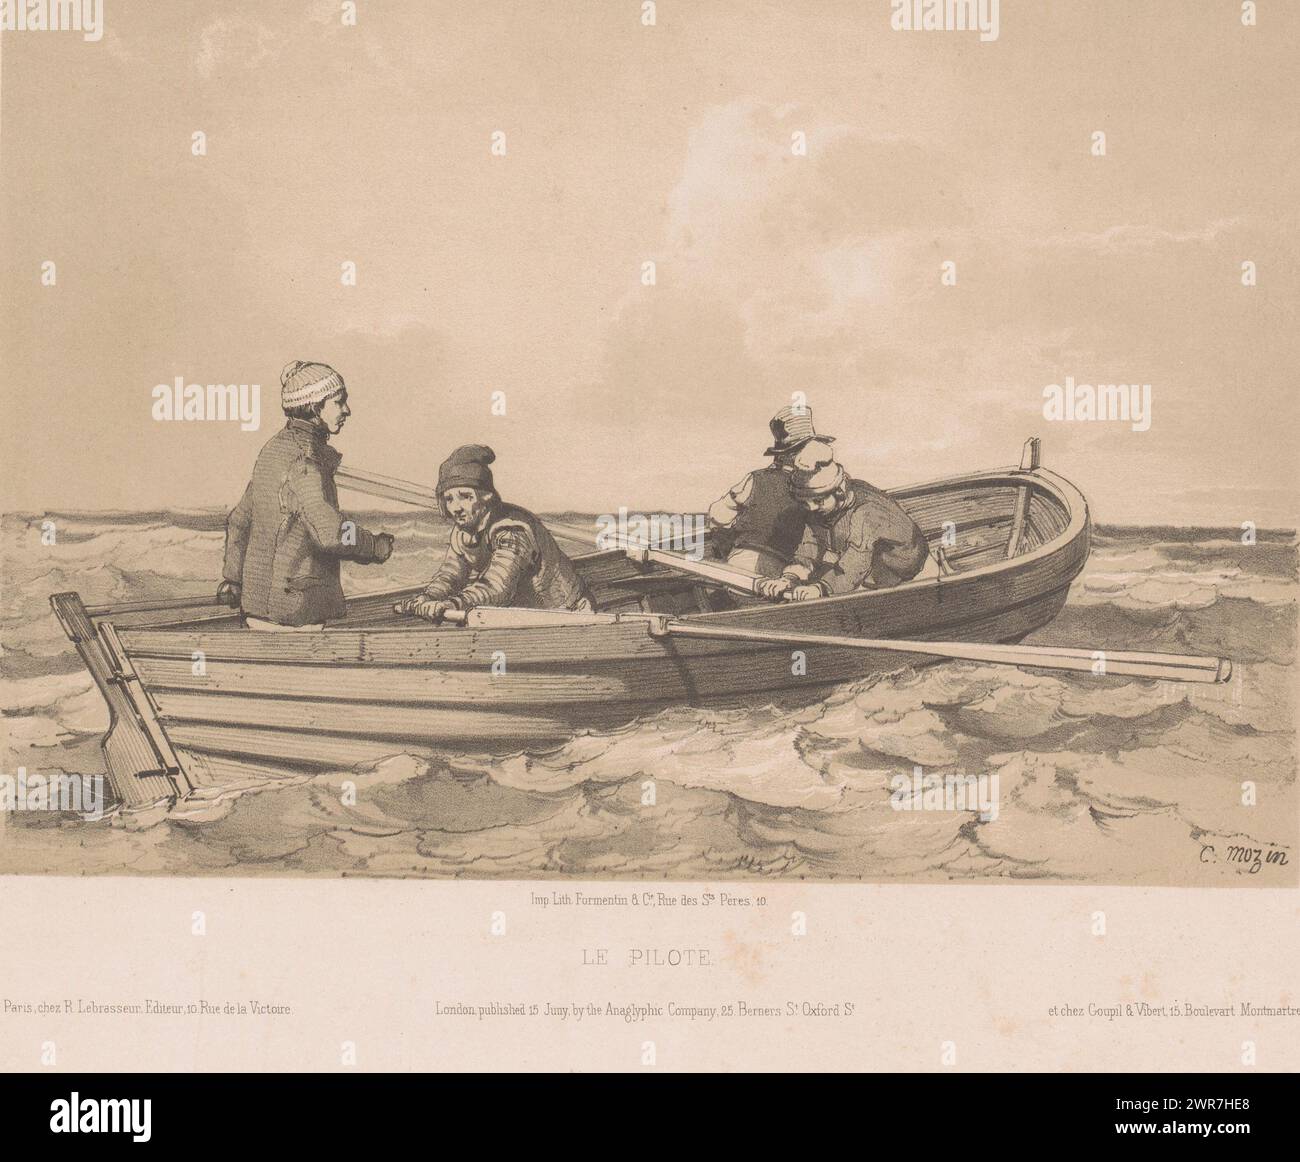 Four men in a rowing boat, Le pilote (title on object), print maker: Charles Louis Mozin, printer: Formentin & Cie., publisher: R. Lebrasseur, printer: Paris, publisher: Paris, publisher: Paris, publisher: London, 1841 - 1850, paper, height 274 mm × width 359 mm, print Stock Photo